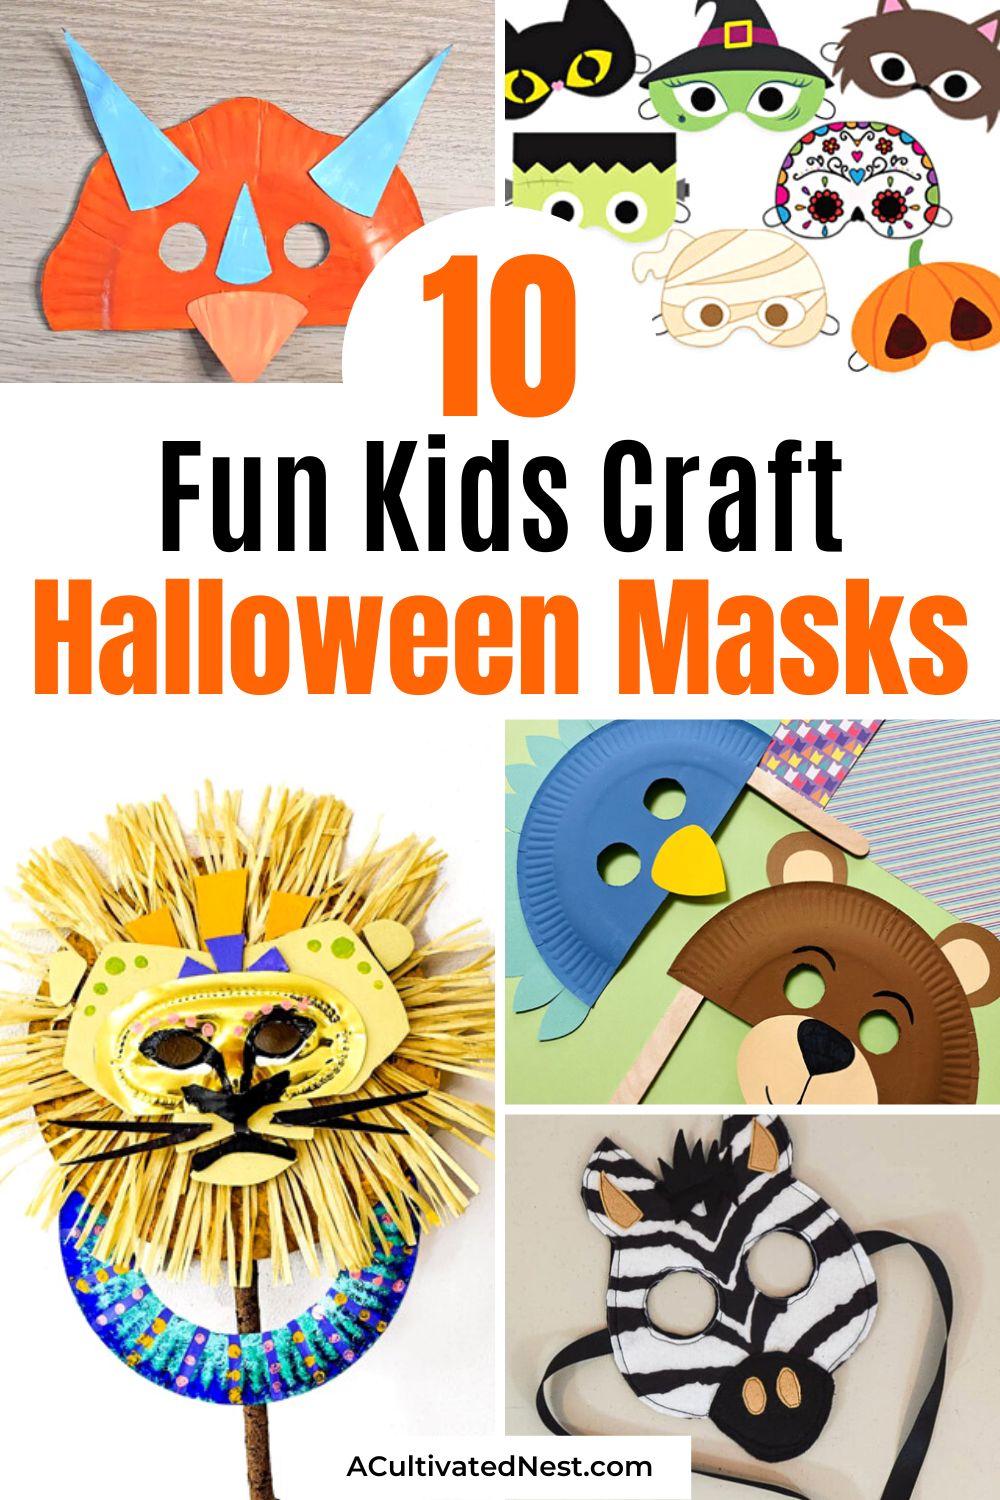 10 Fun DIY Halloween Masks- Make Halloween extra special for your kids with these creative DIY Halloween mask ideas. Transform them into their favorite characters or creatures and let their imagination run wild! Spooktacular fun awaits! | #HalloweenDIY #craftsForKids #HalloweenCostumeIdeas #Halloween #ACultivatedNest